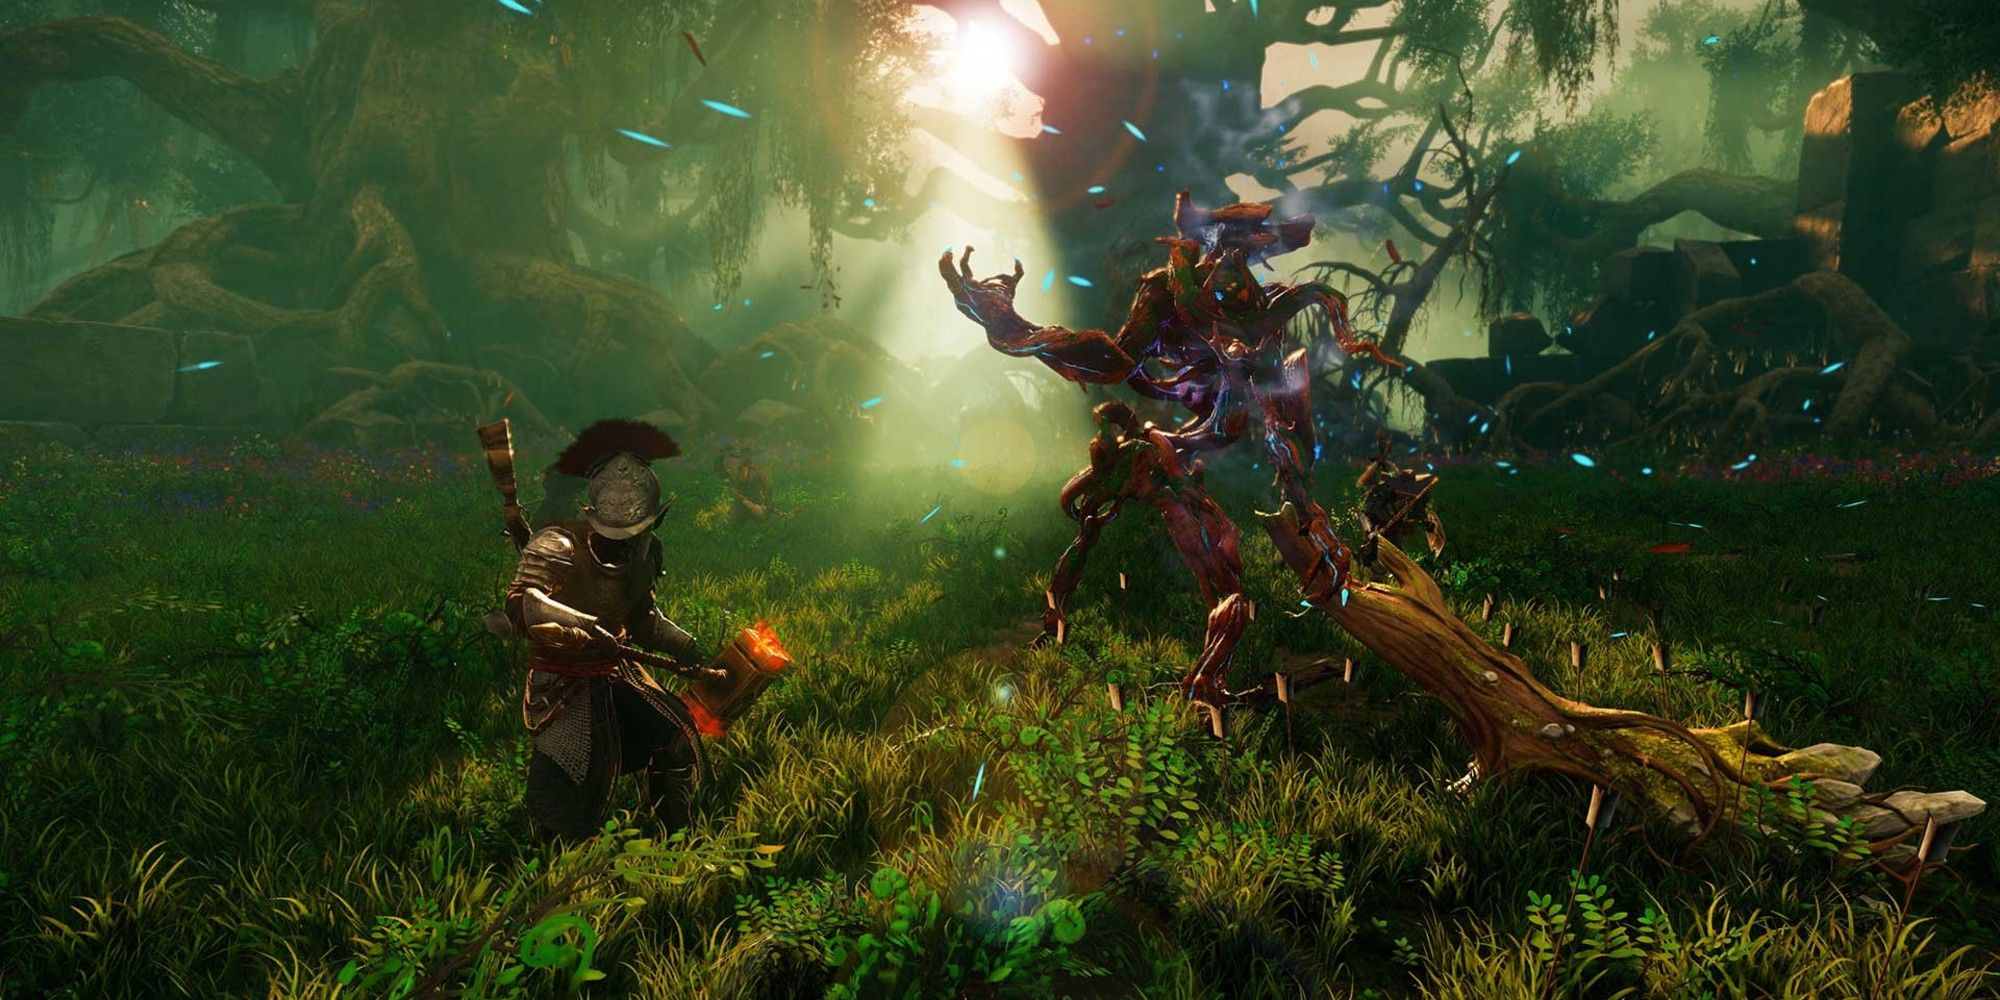 A player fights a boss in the forest in New World